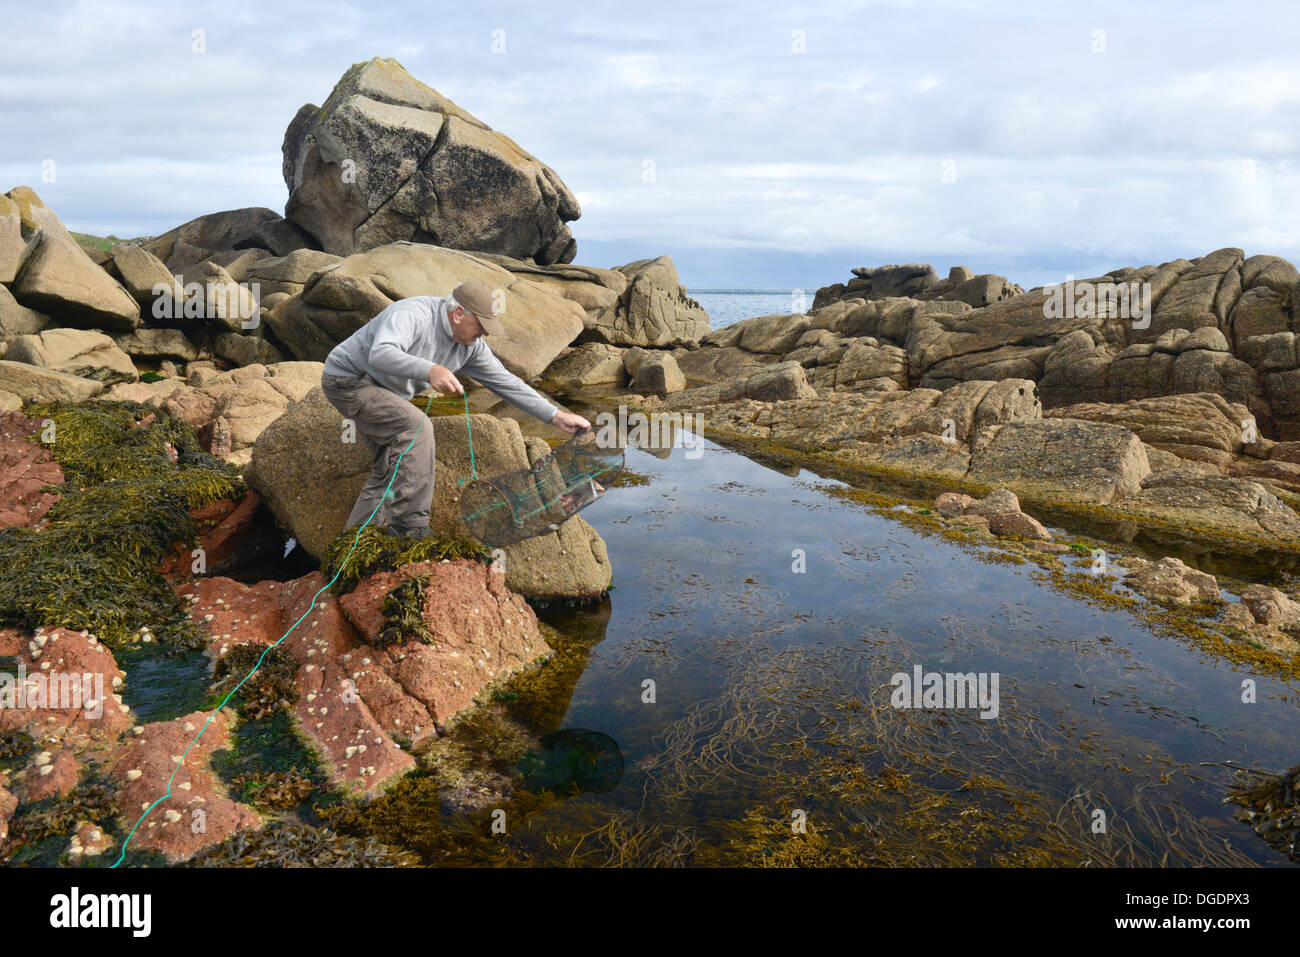 Setting a trap in a rock pool at Old Town Bay, St Mary's, Isles of Scilly, UK Stock Photo